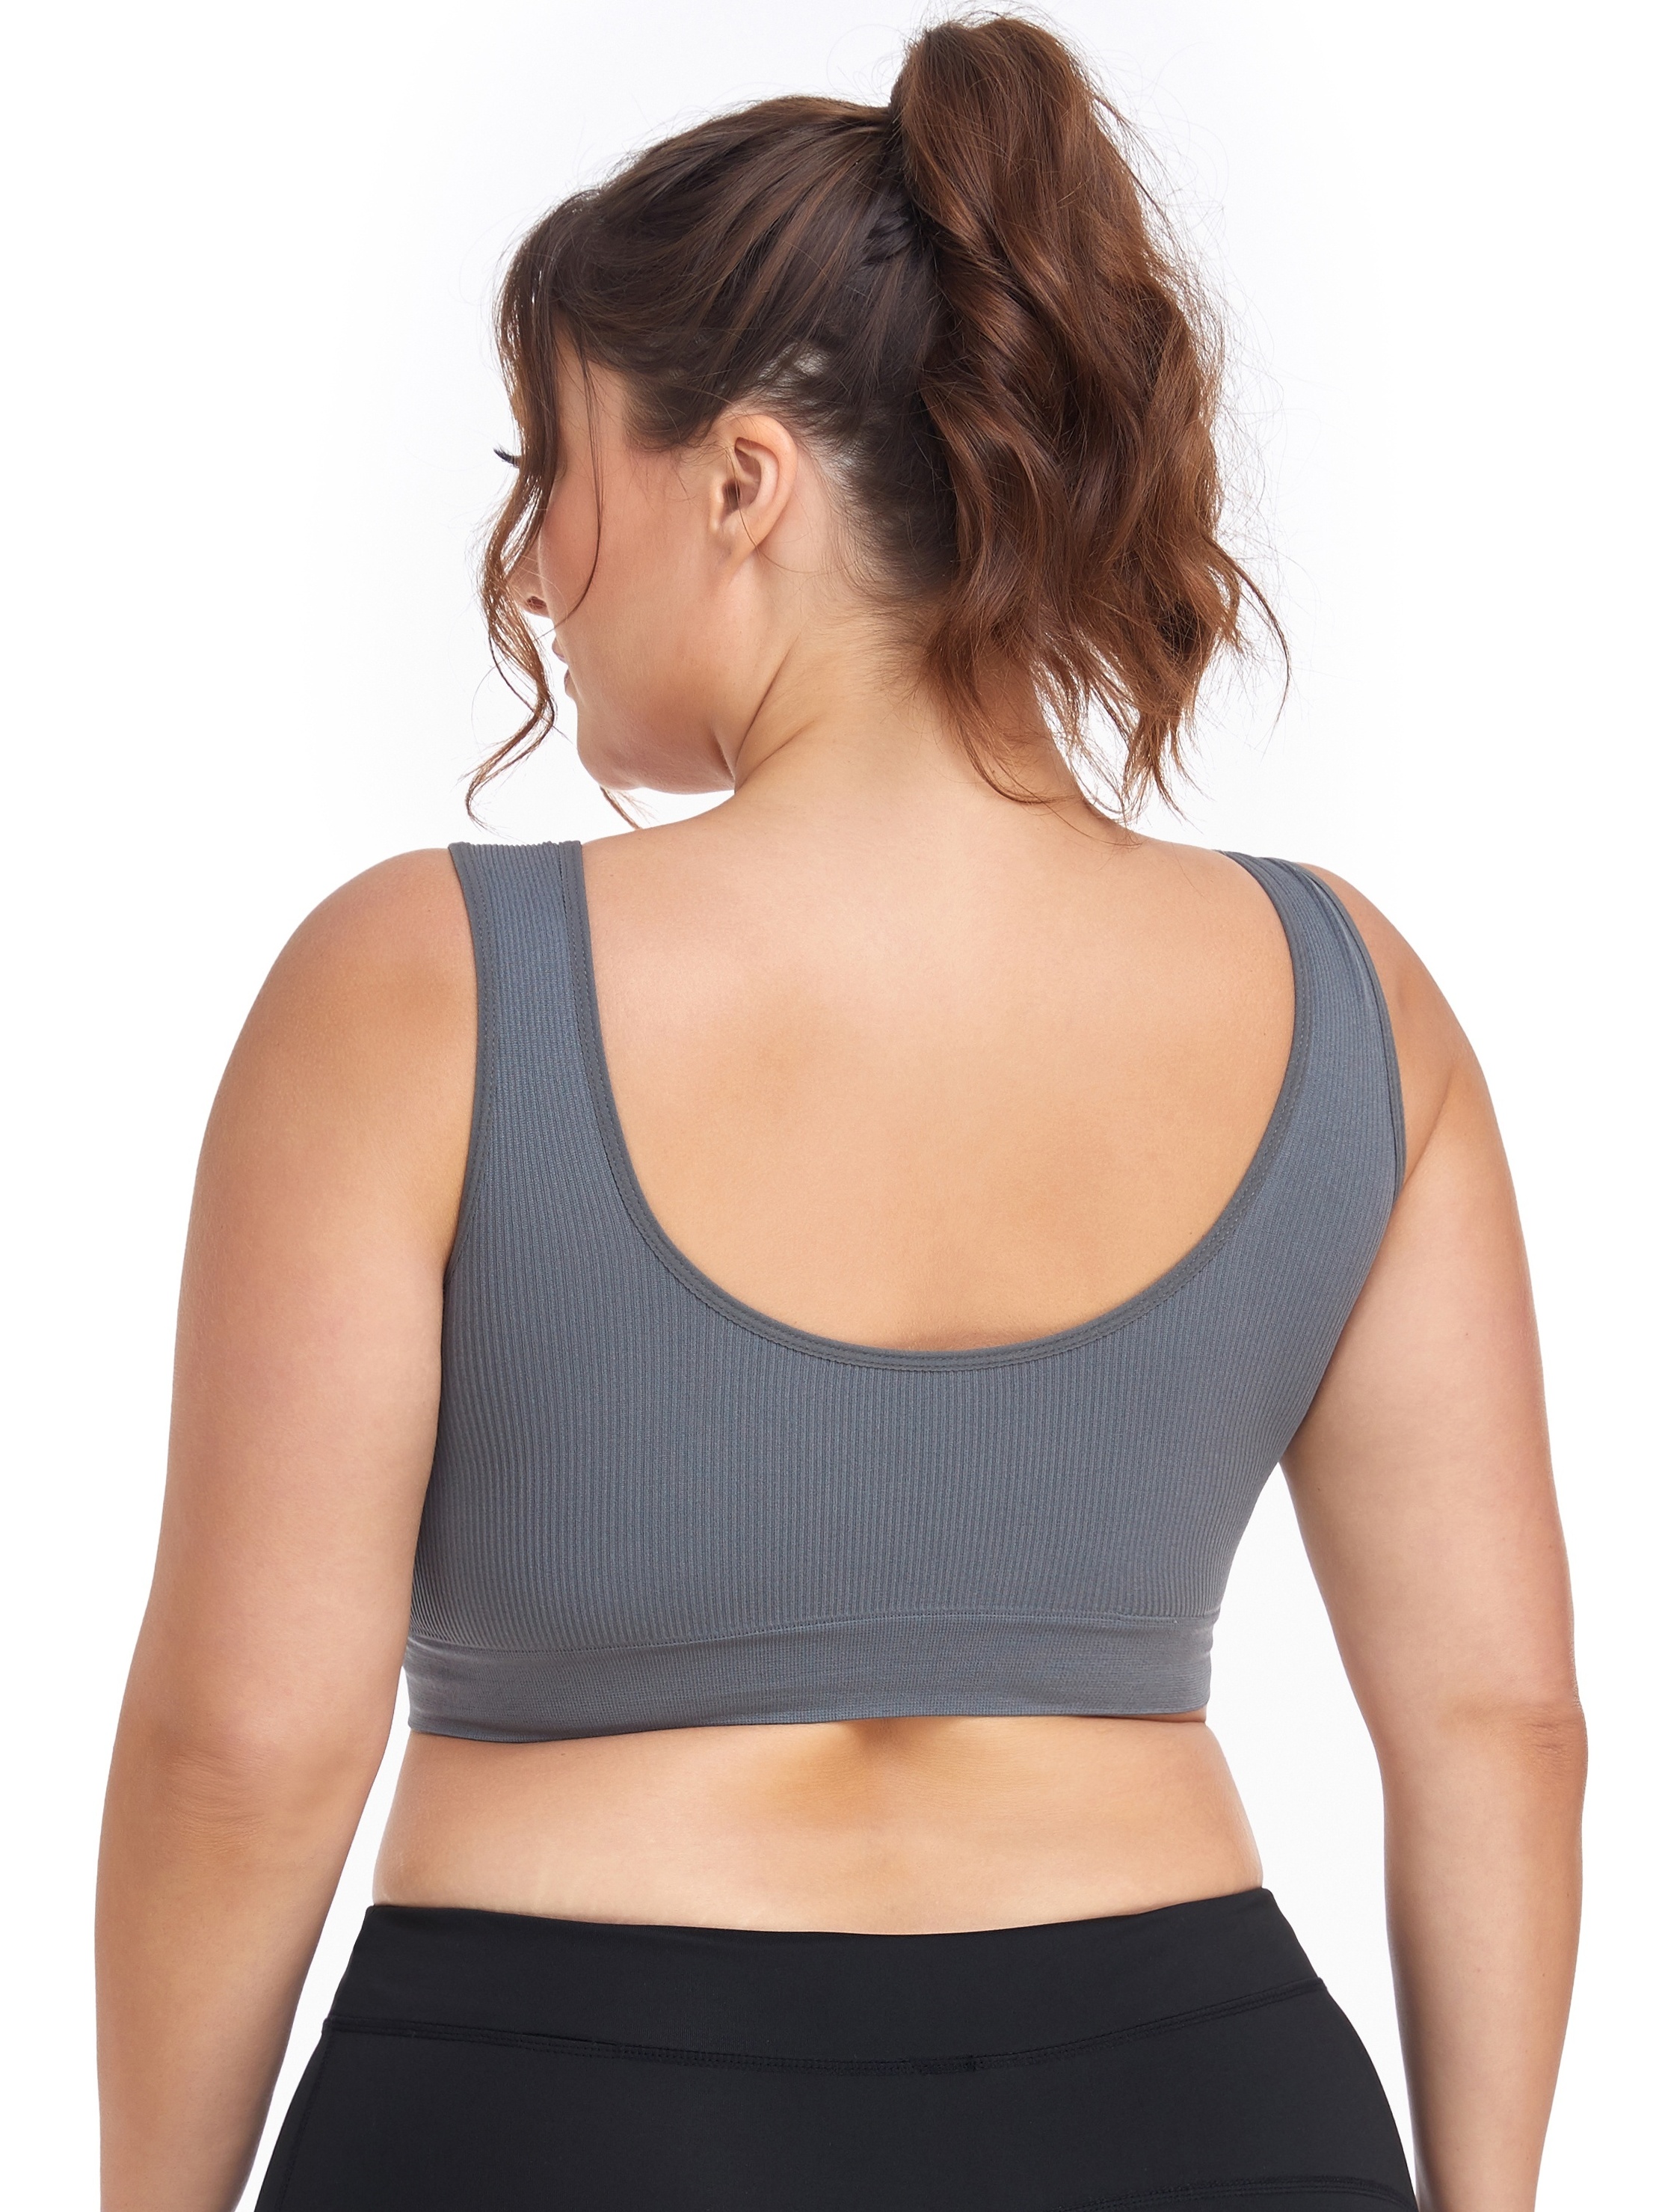 Plus Size Women's Zipper Back Ribbed Sports Bra For Show-Off Your Back  Beauty